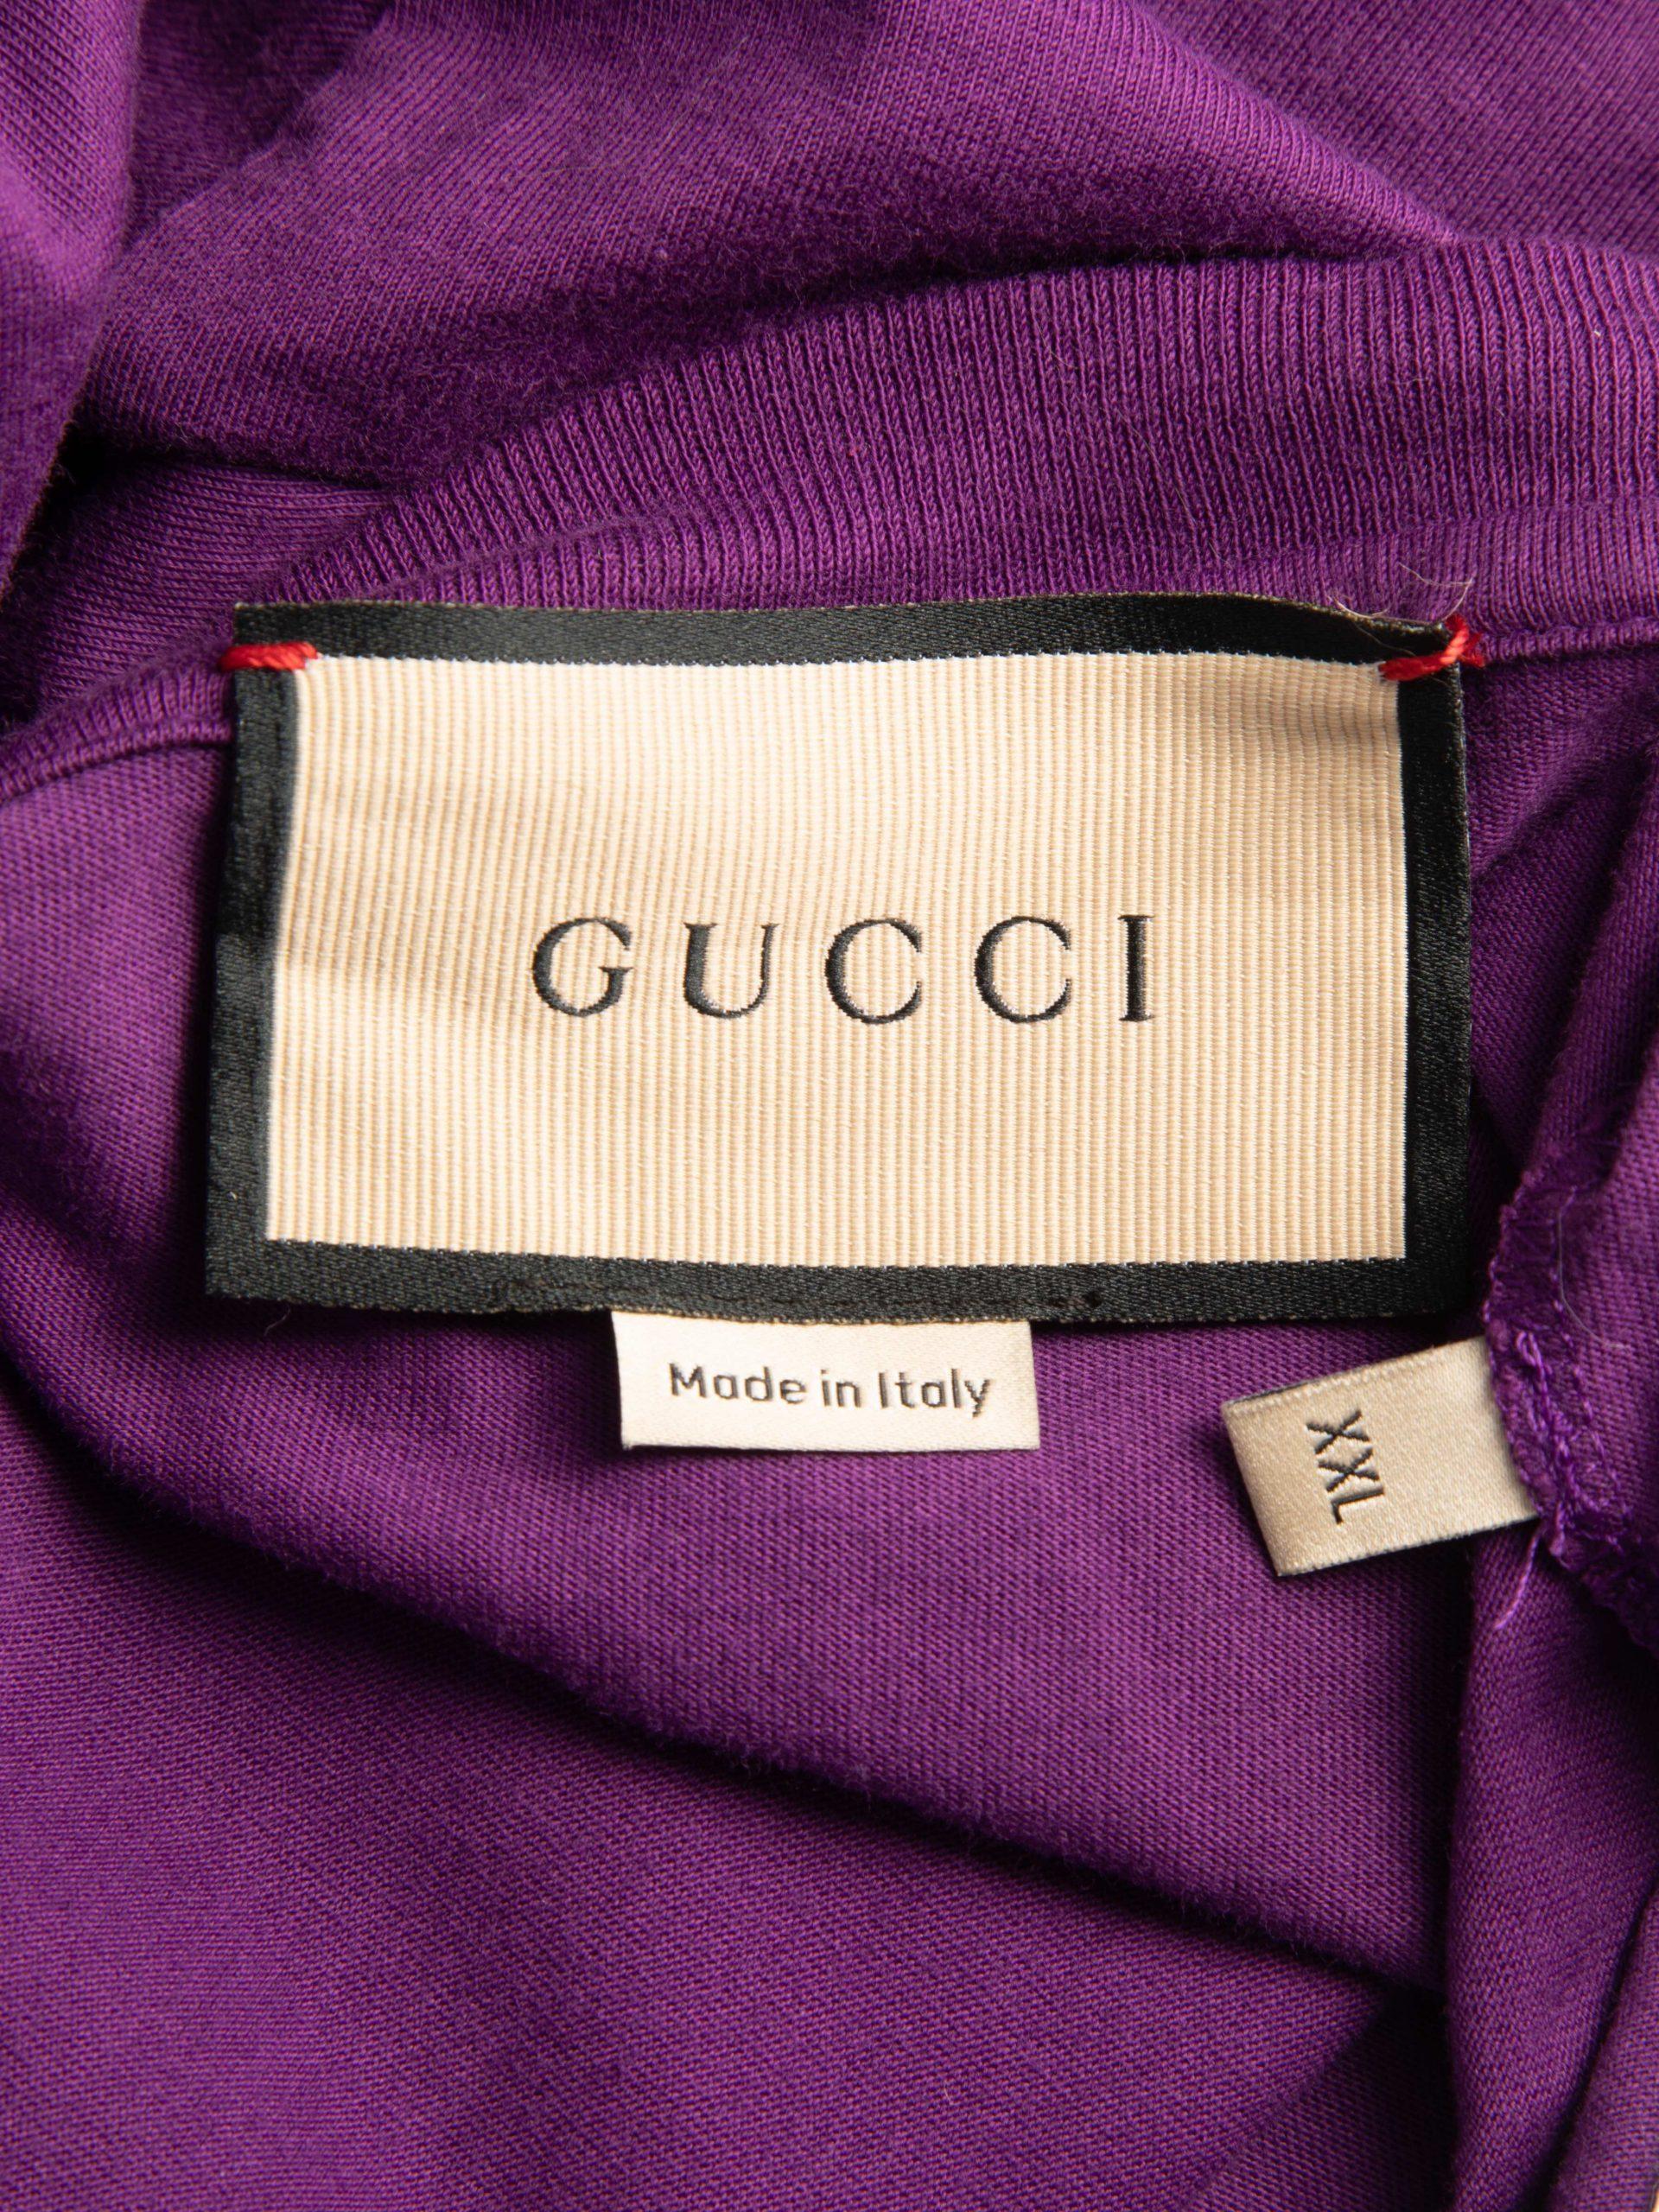 gucci blueberry